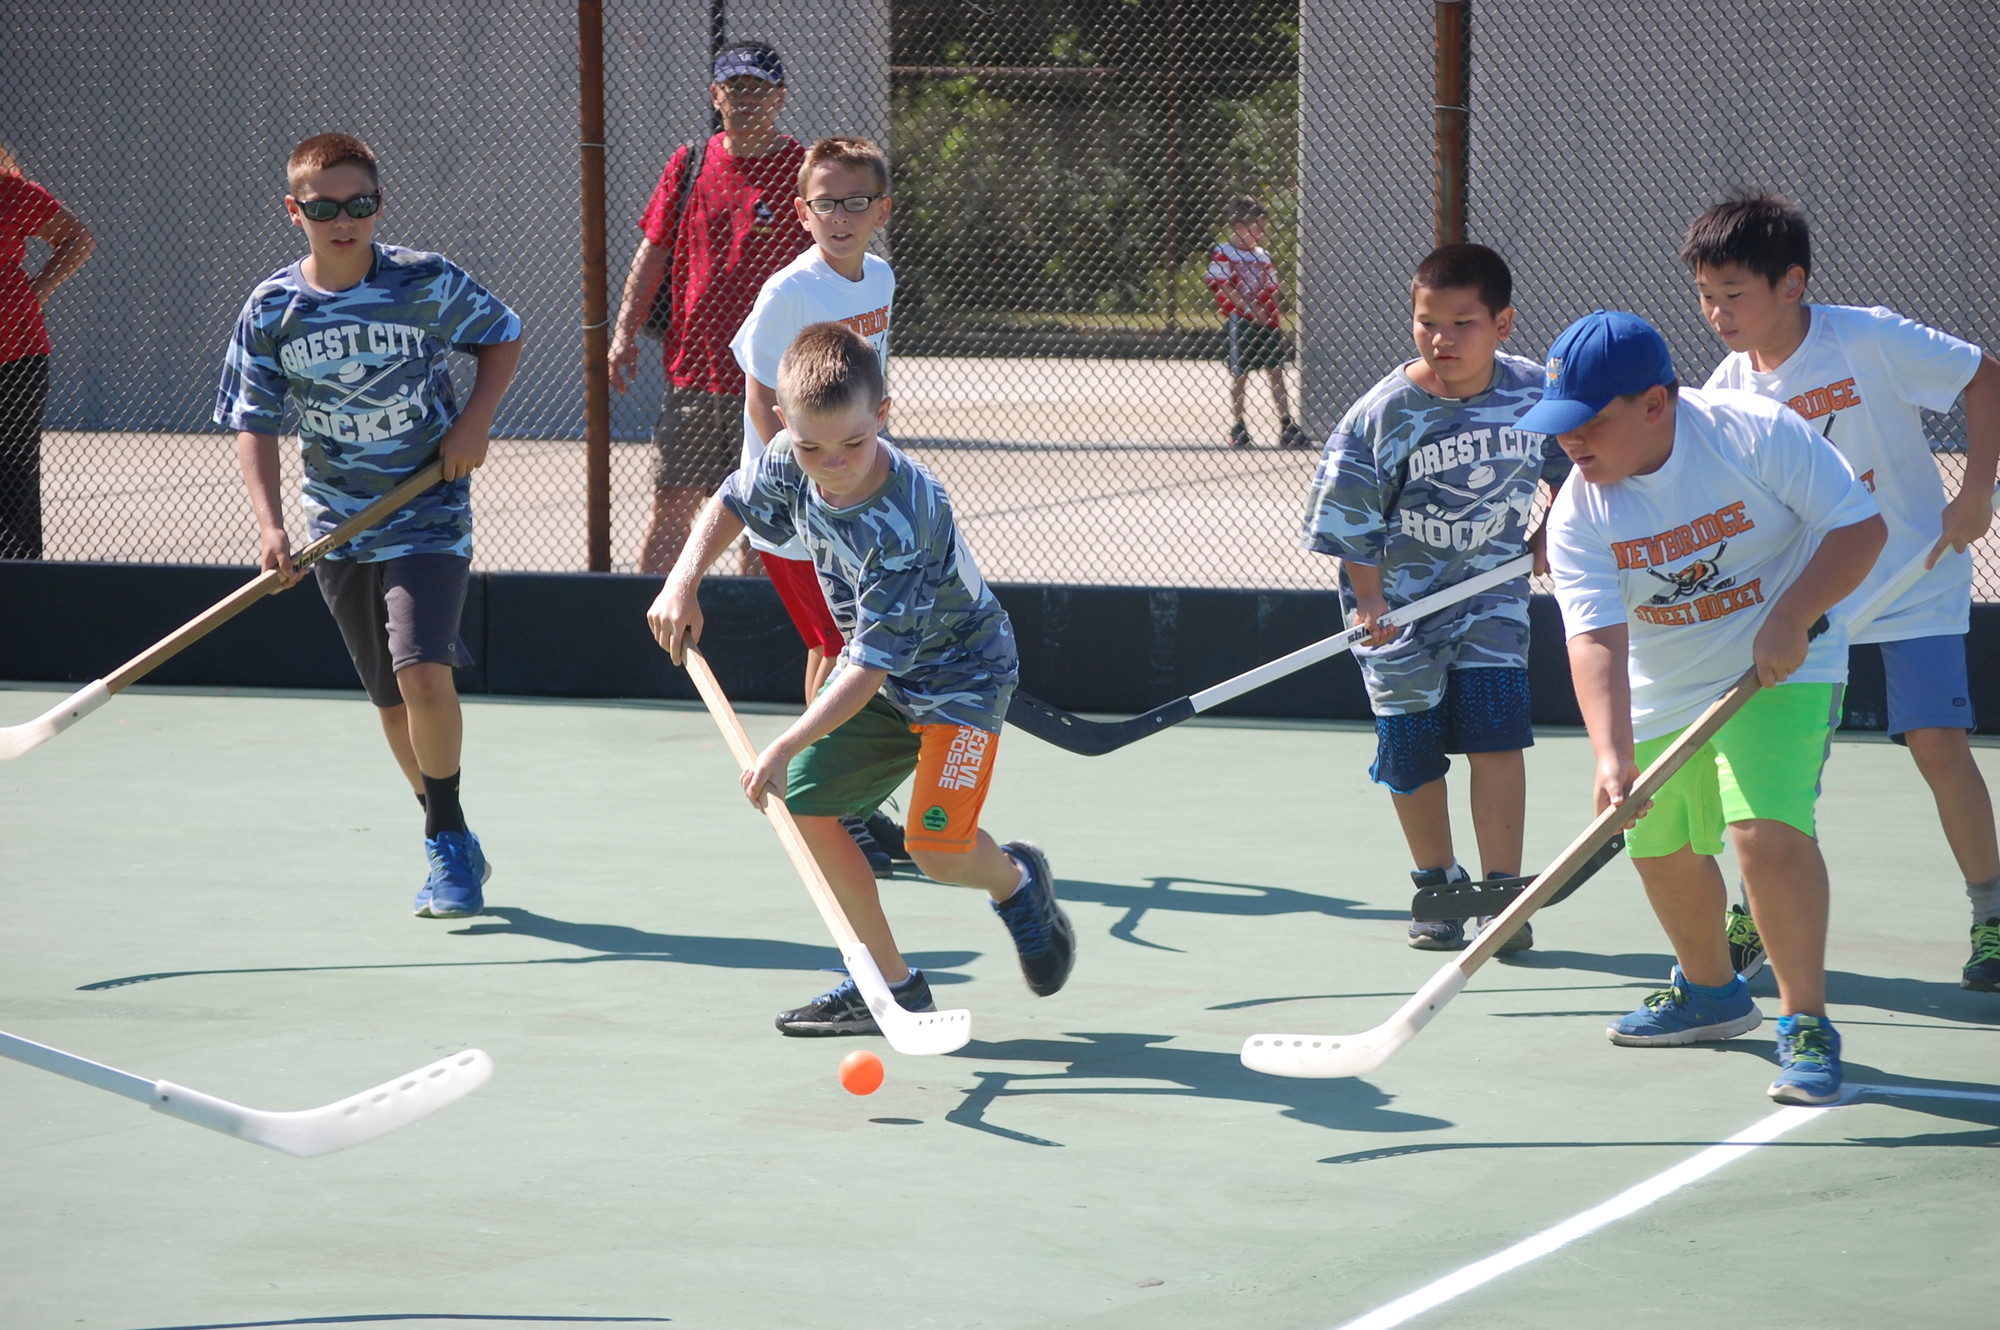 Newbridge Road Park and Forest City Park faced off in the annual street hockey tournament.